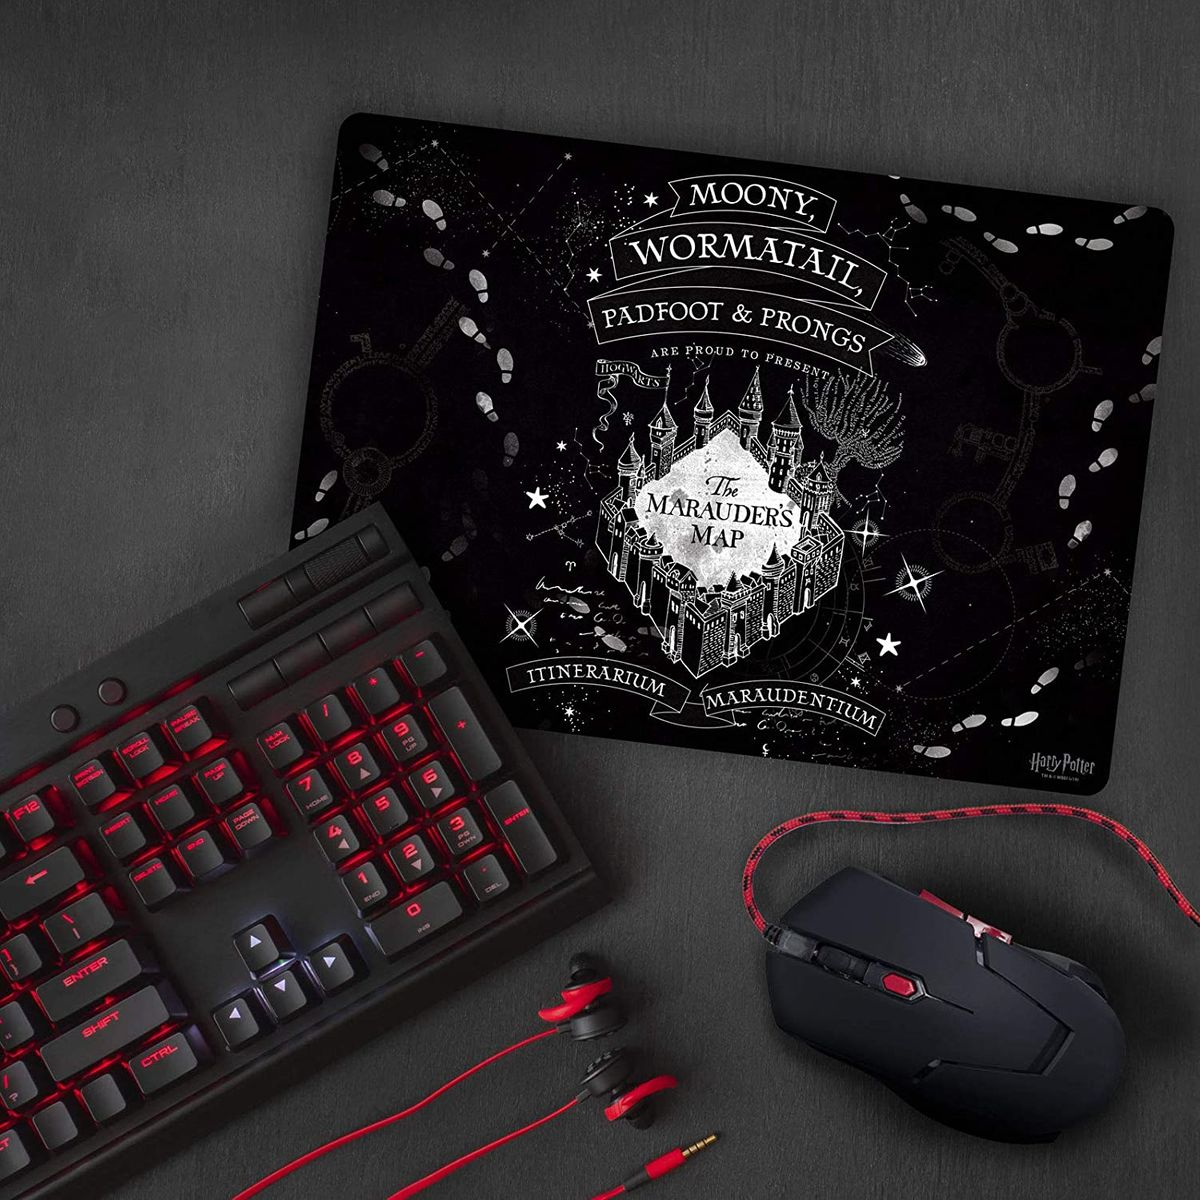 des x 0 Rumtreibers ABYSTYLE Gaming Karte mm) Potter (0 mm Mousepad Harry